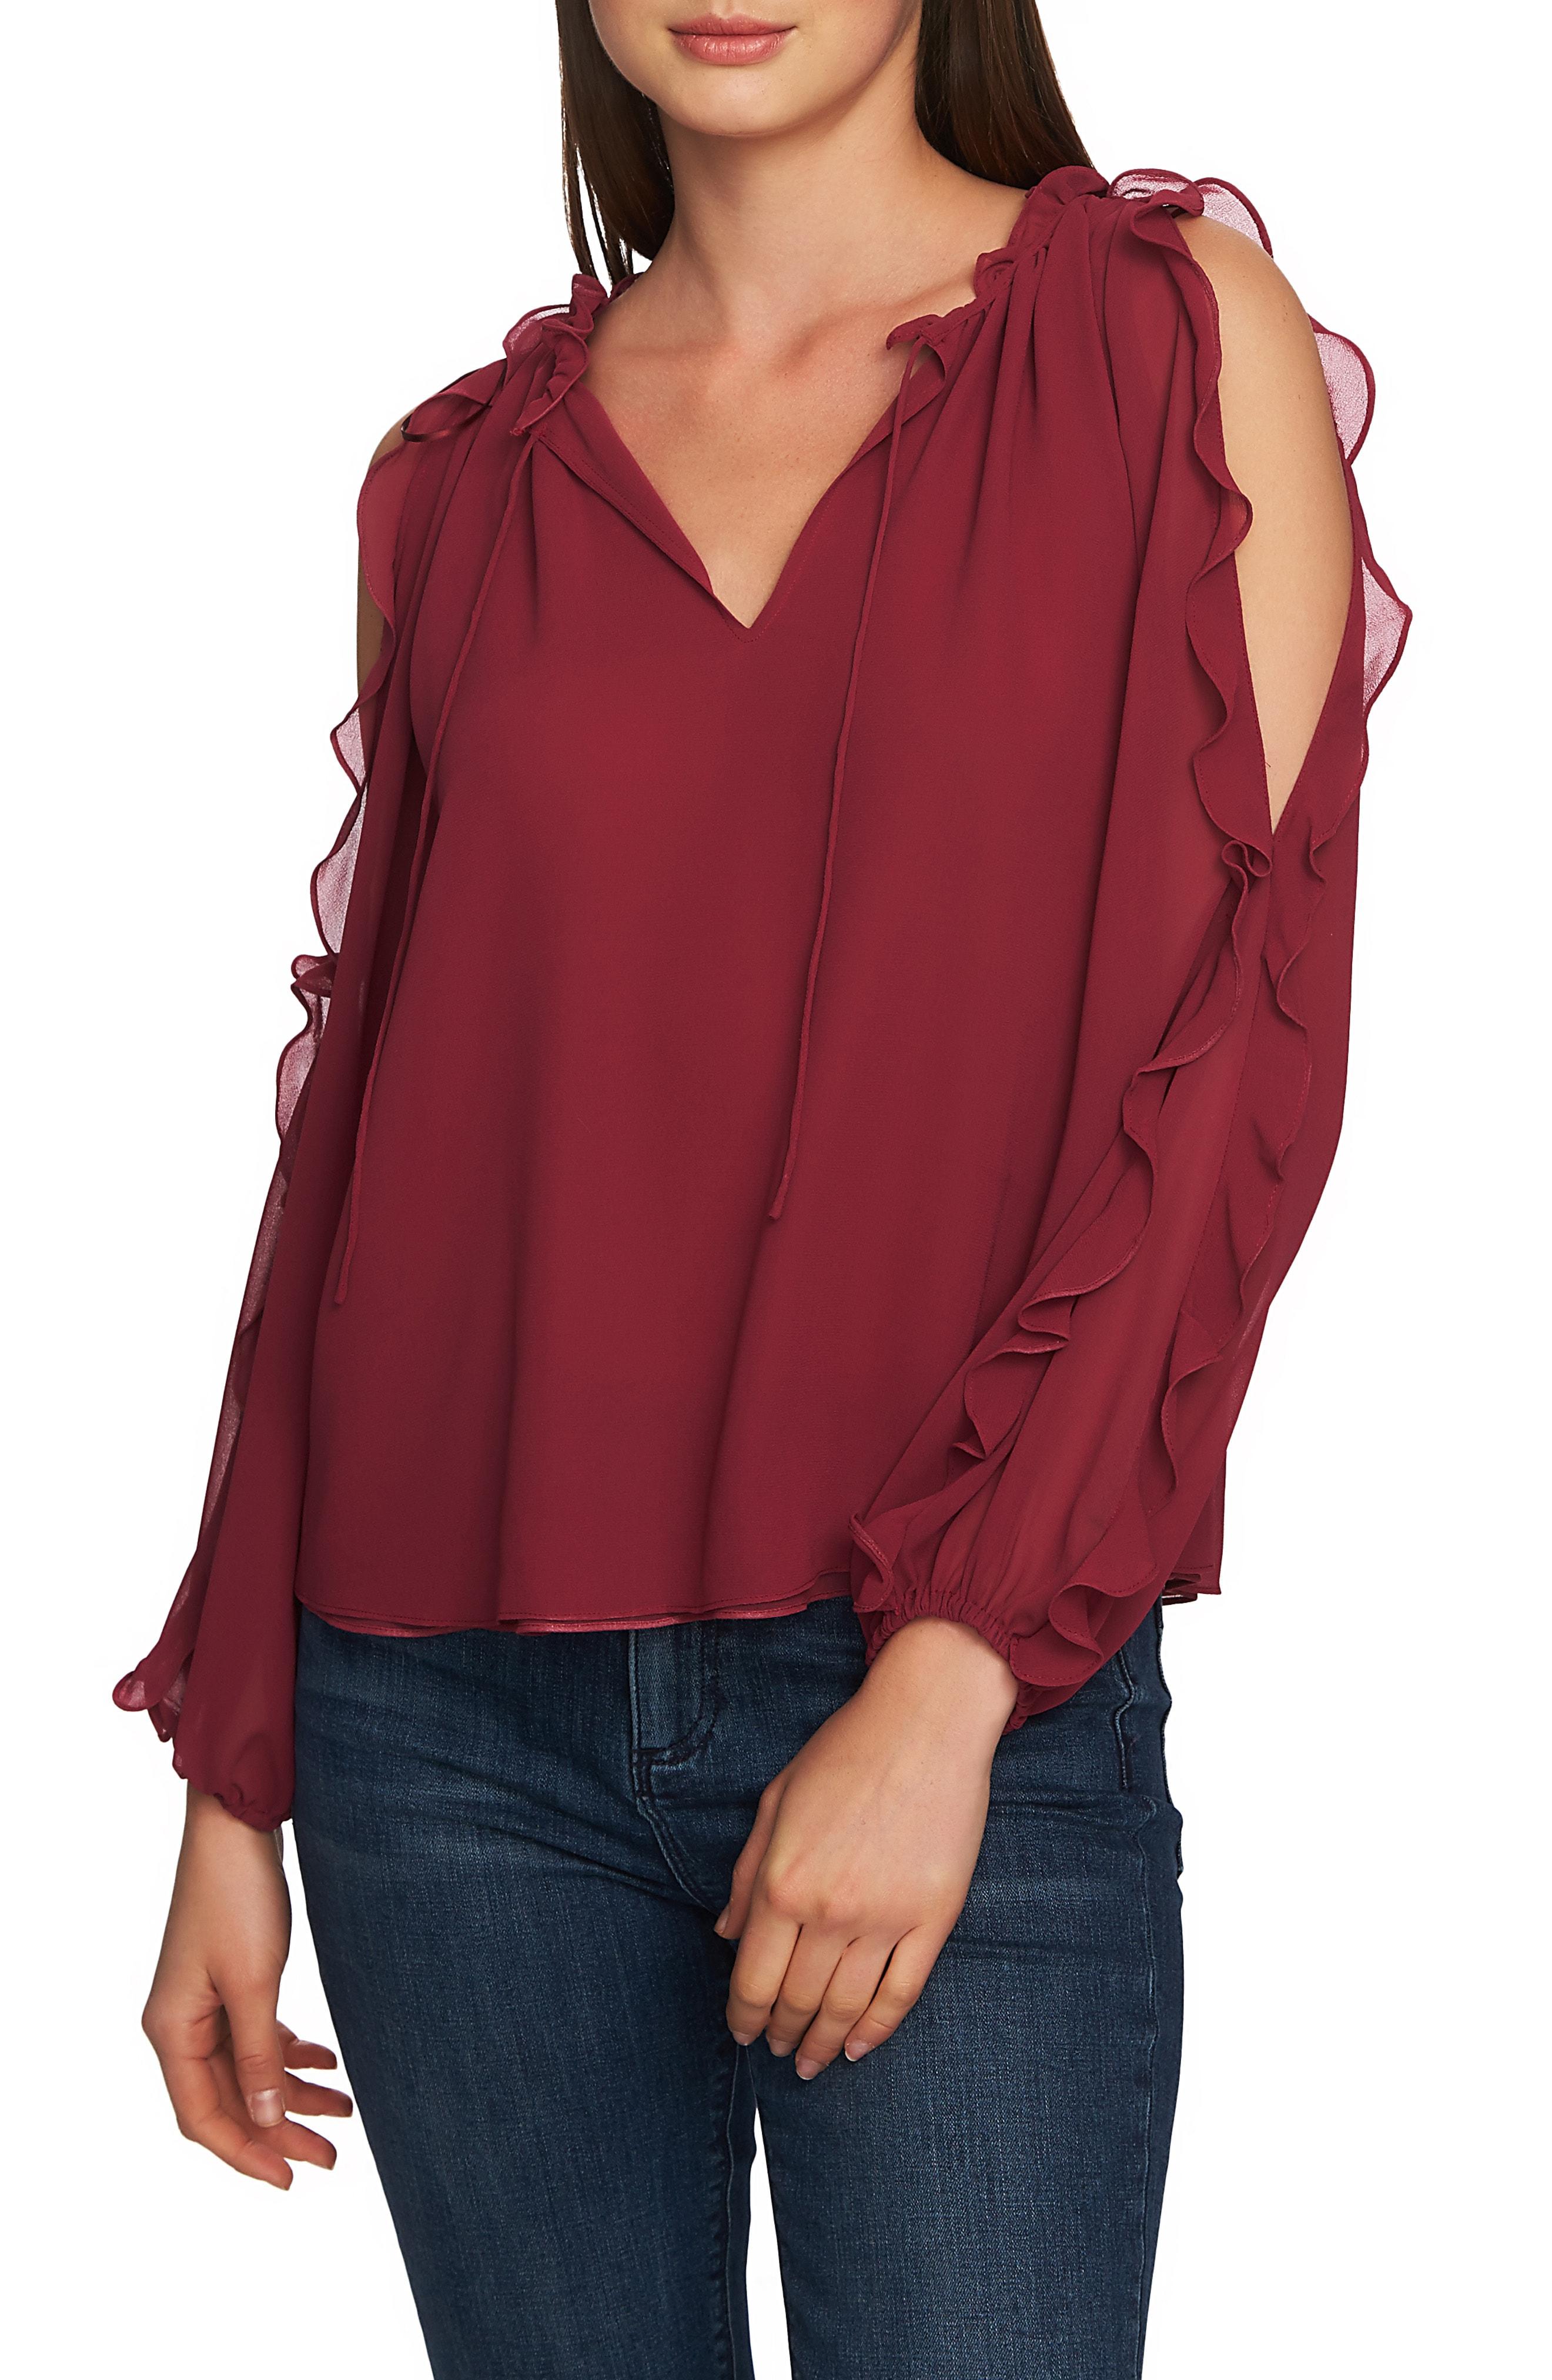 Lyst - 1.STATE Ruffle Cold Shoulder Top in Pink